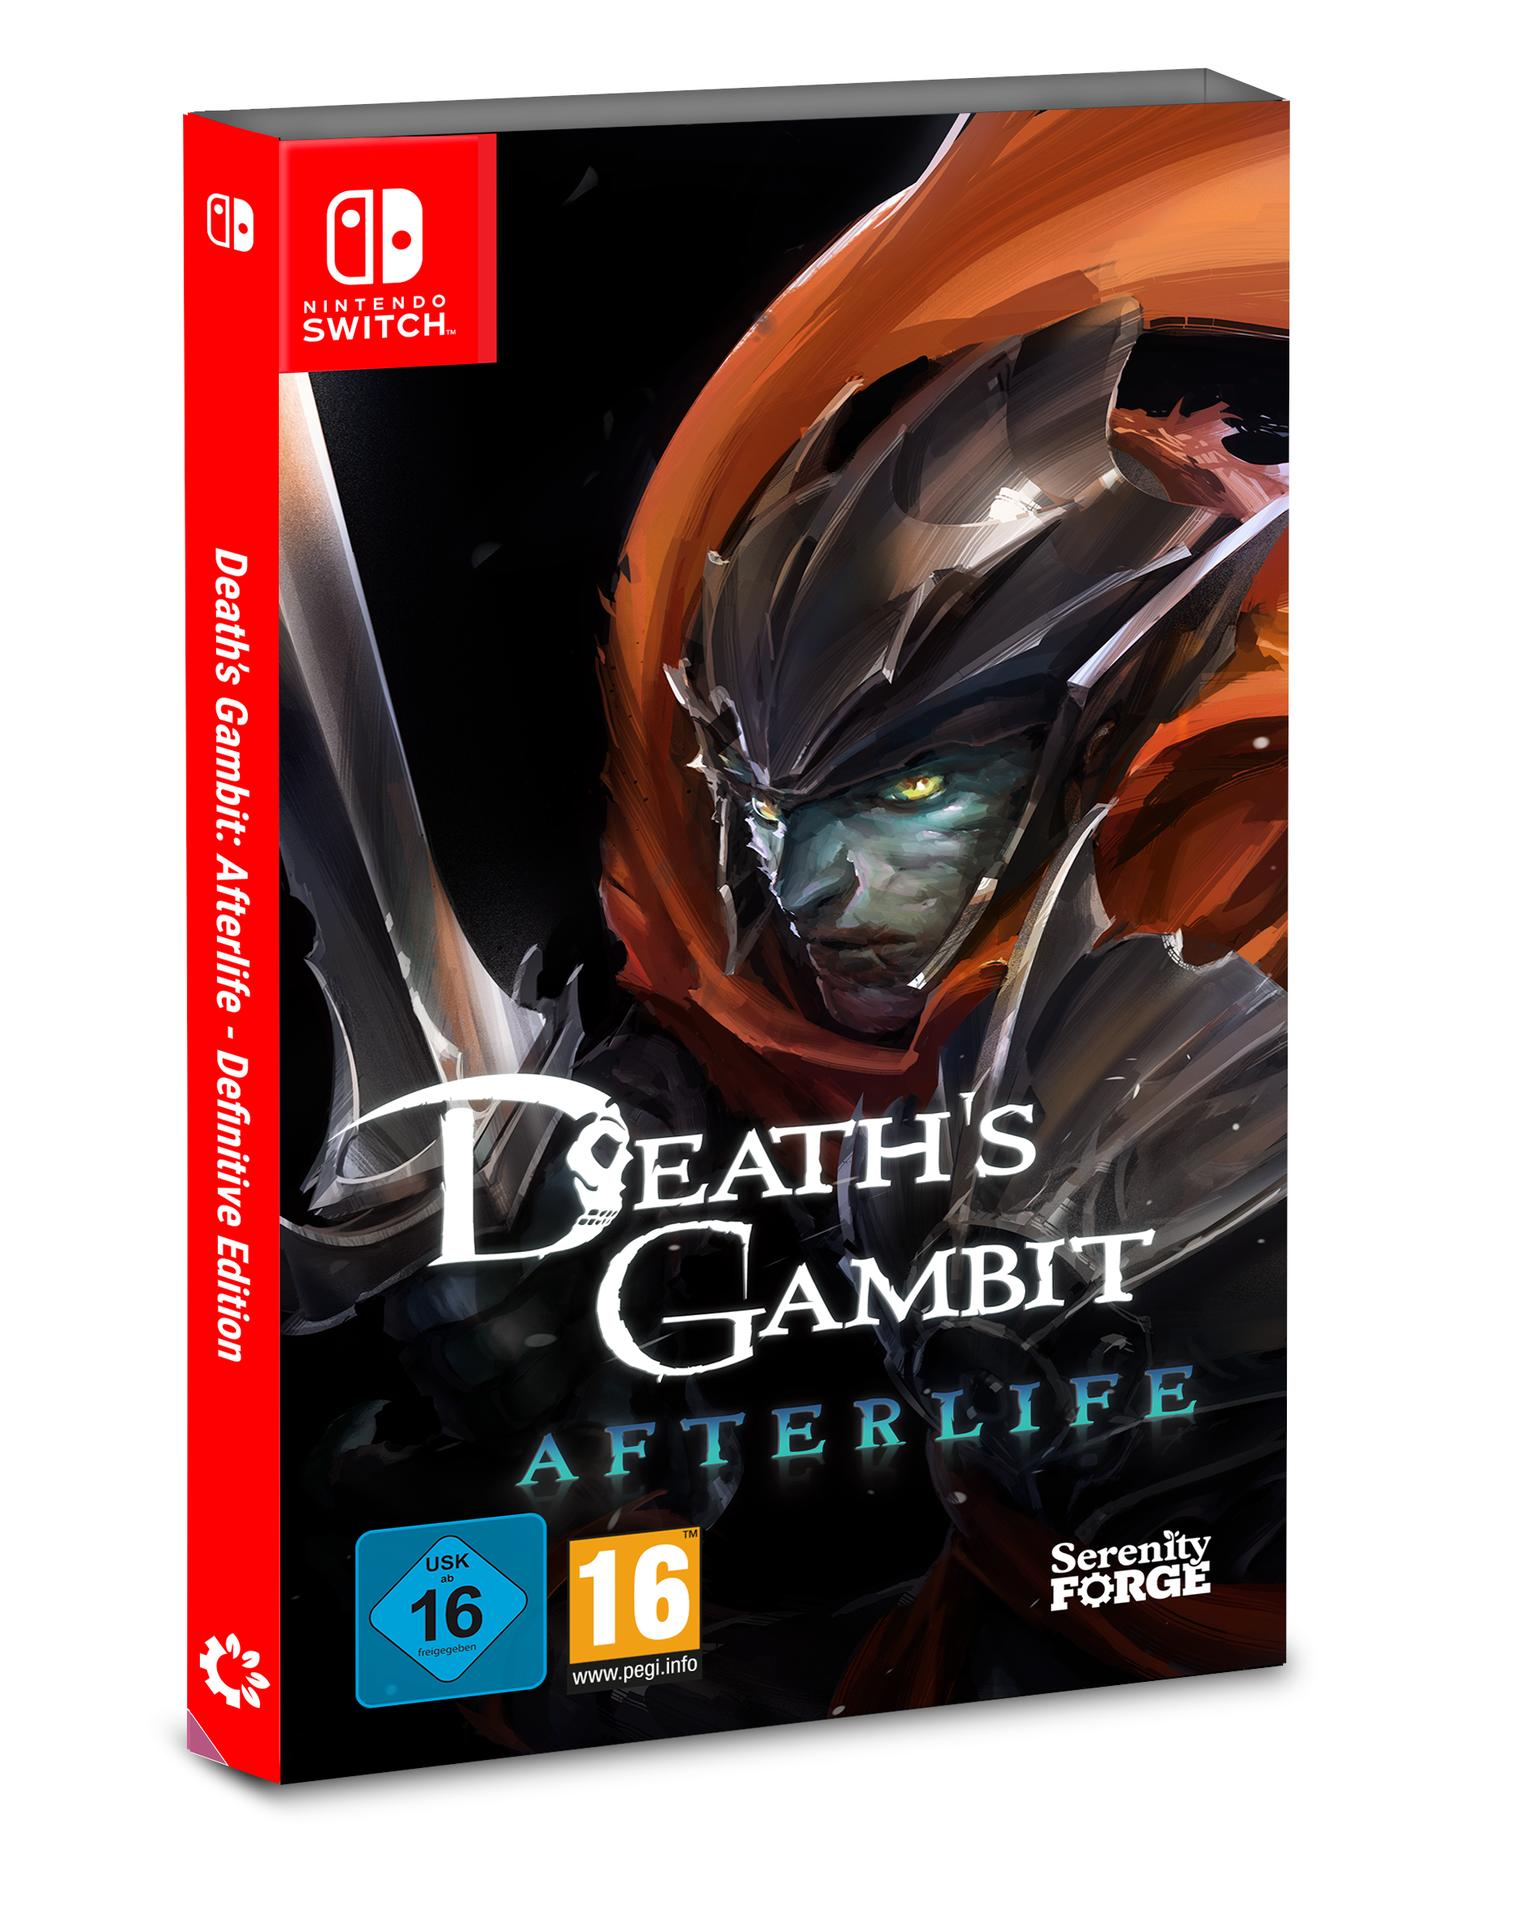 Gambit Switch] Definitive Afterlife - Death\'s Edition - [Nintendo